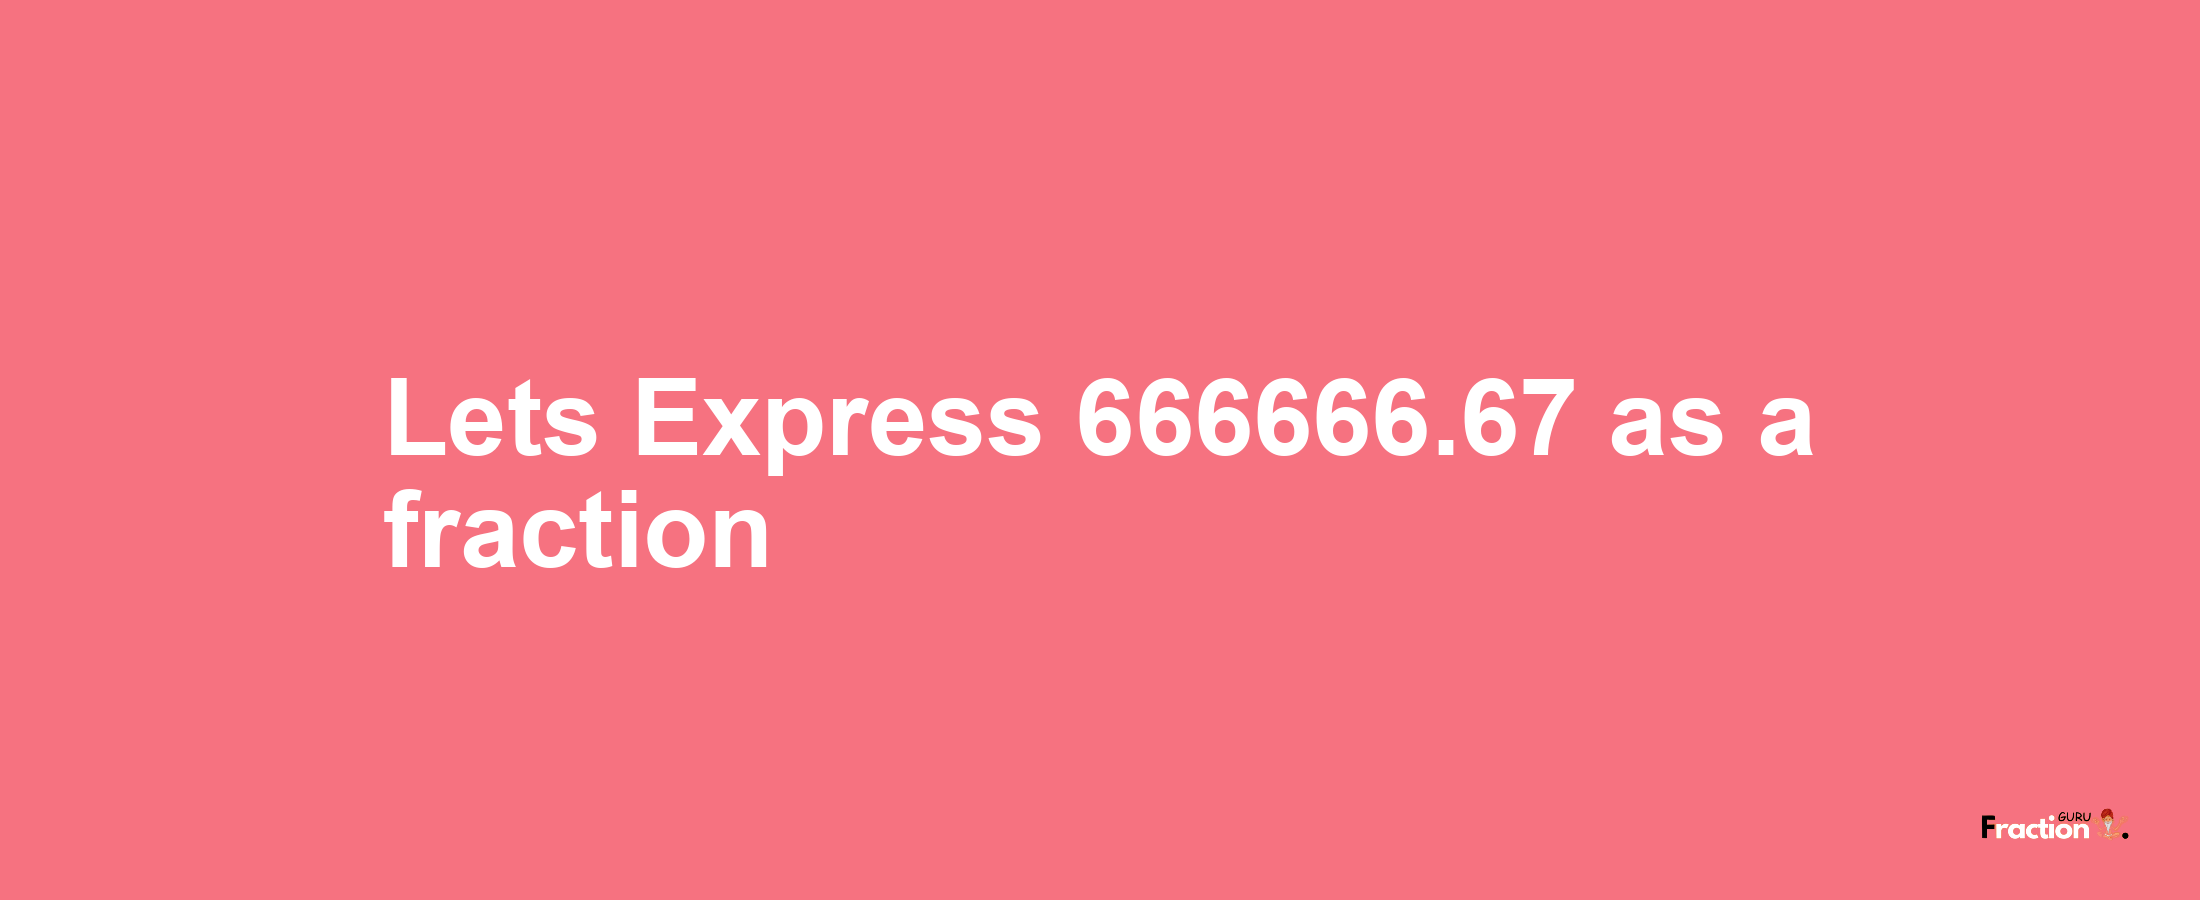 Lets Express 666666.67 as afraction